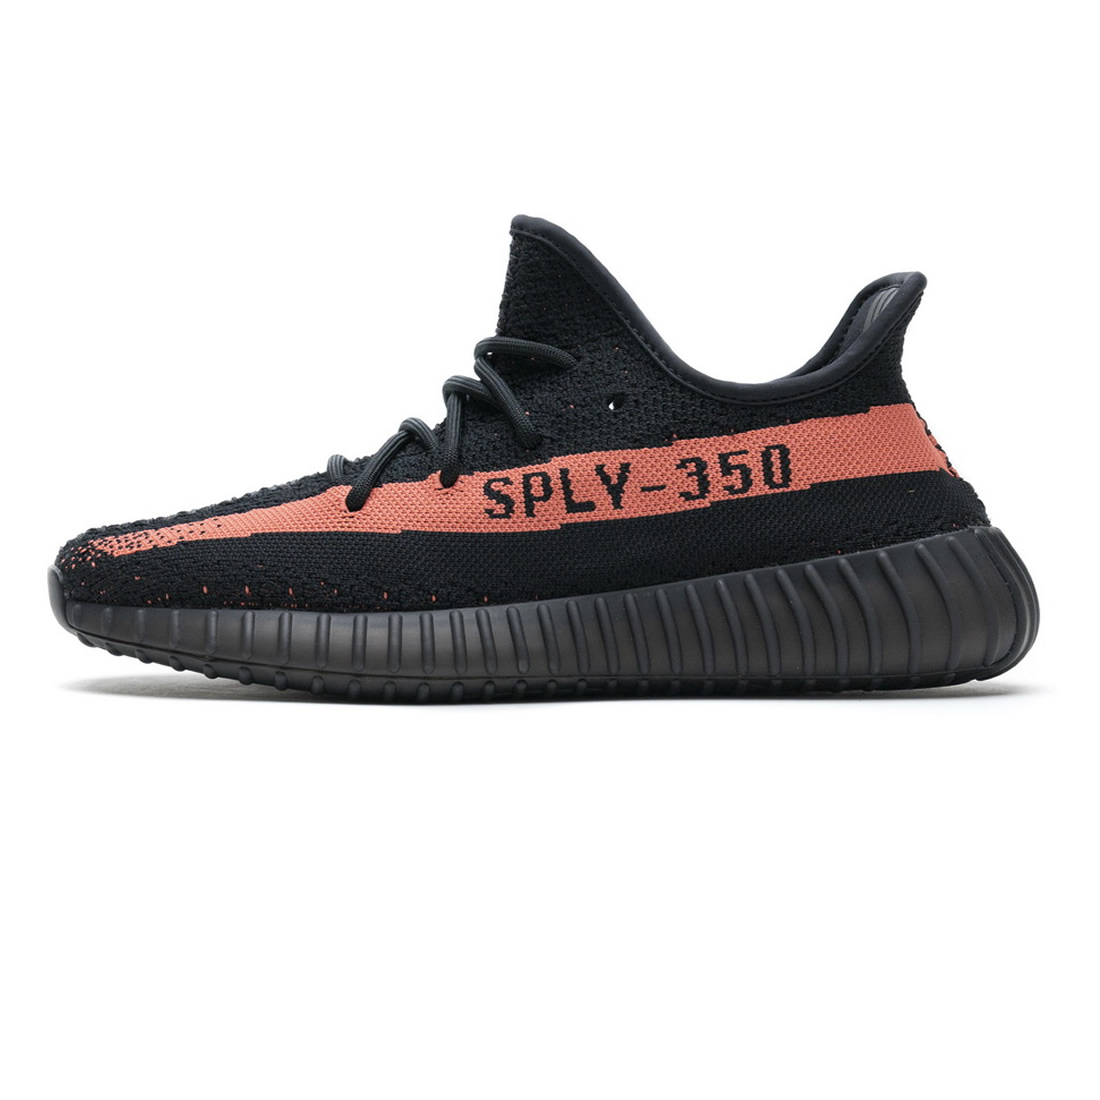 yeezy boost 350 v2 core black red sply-350